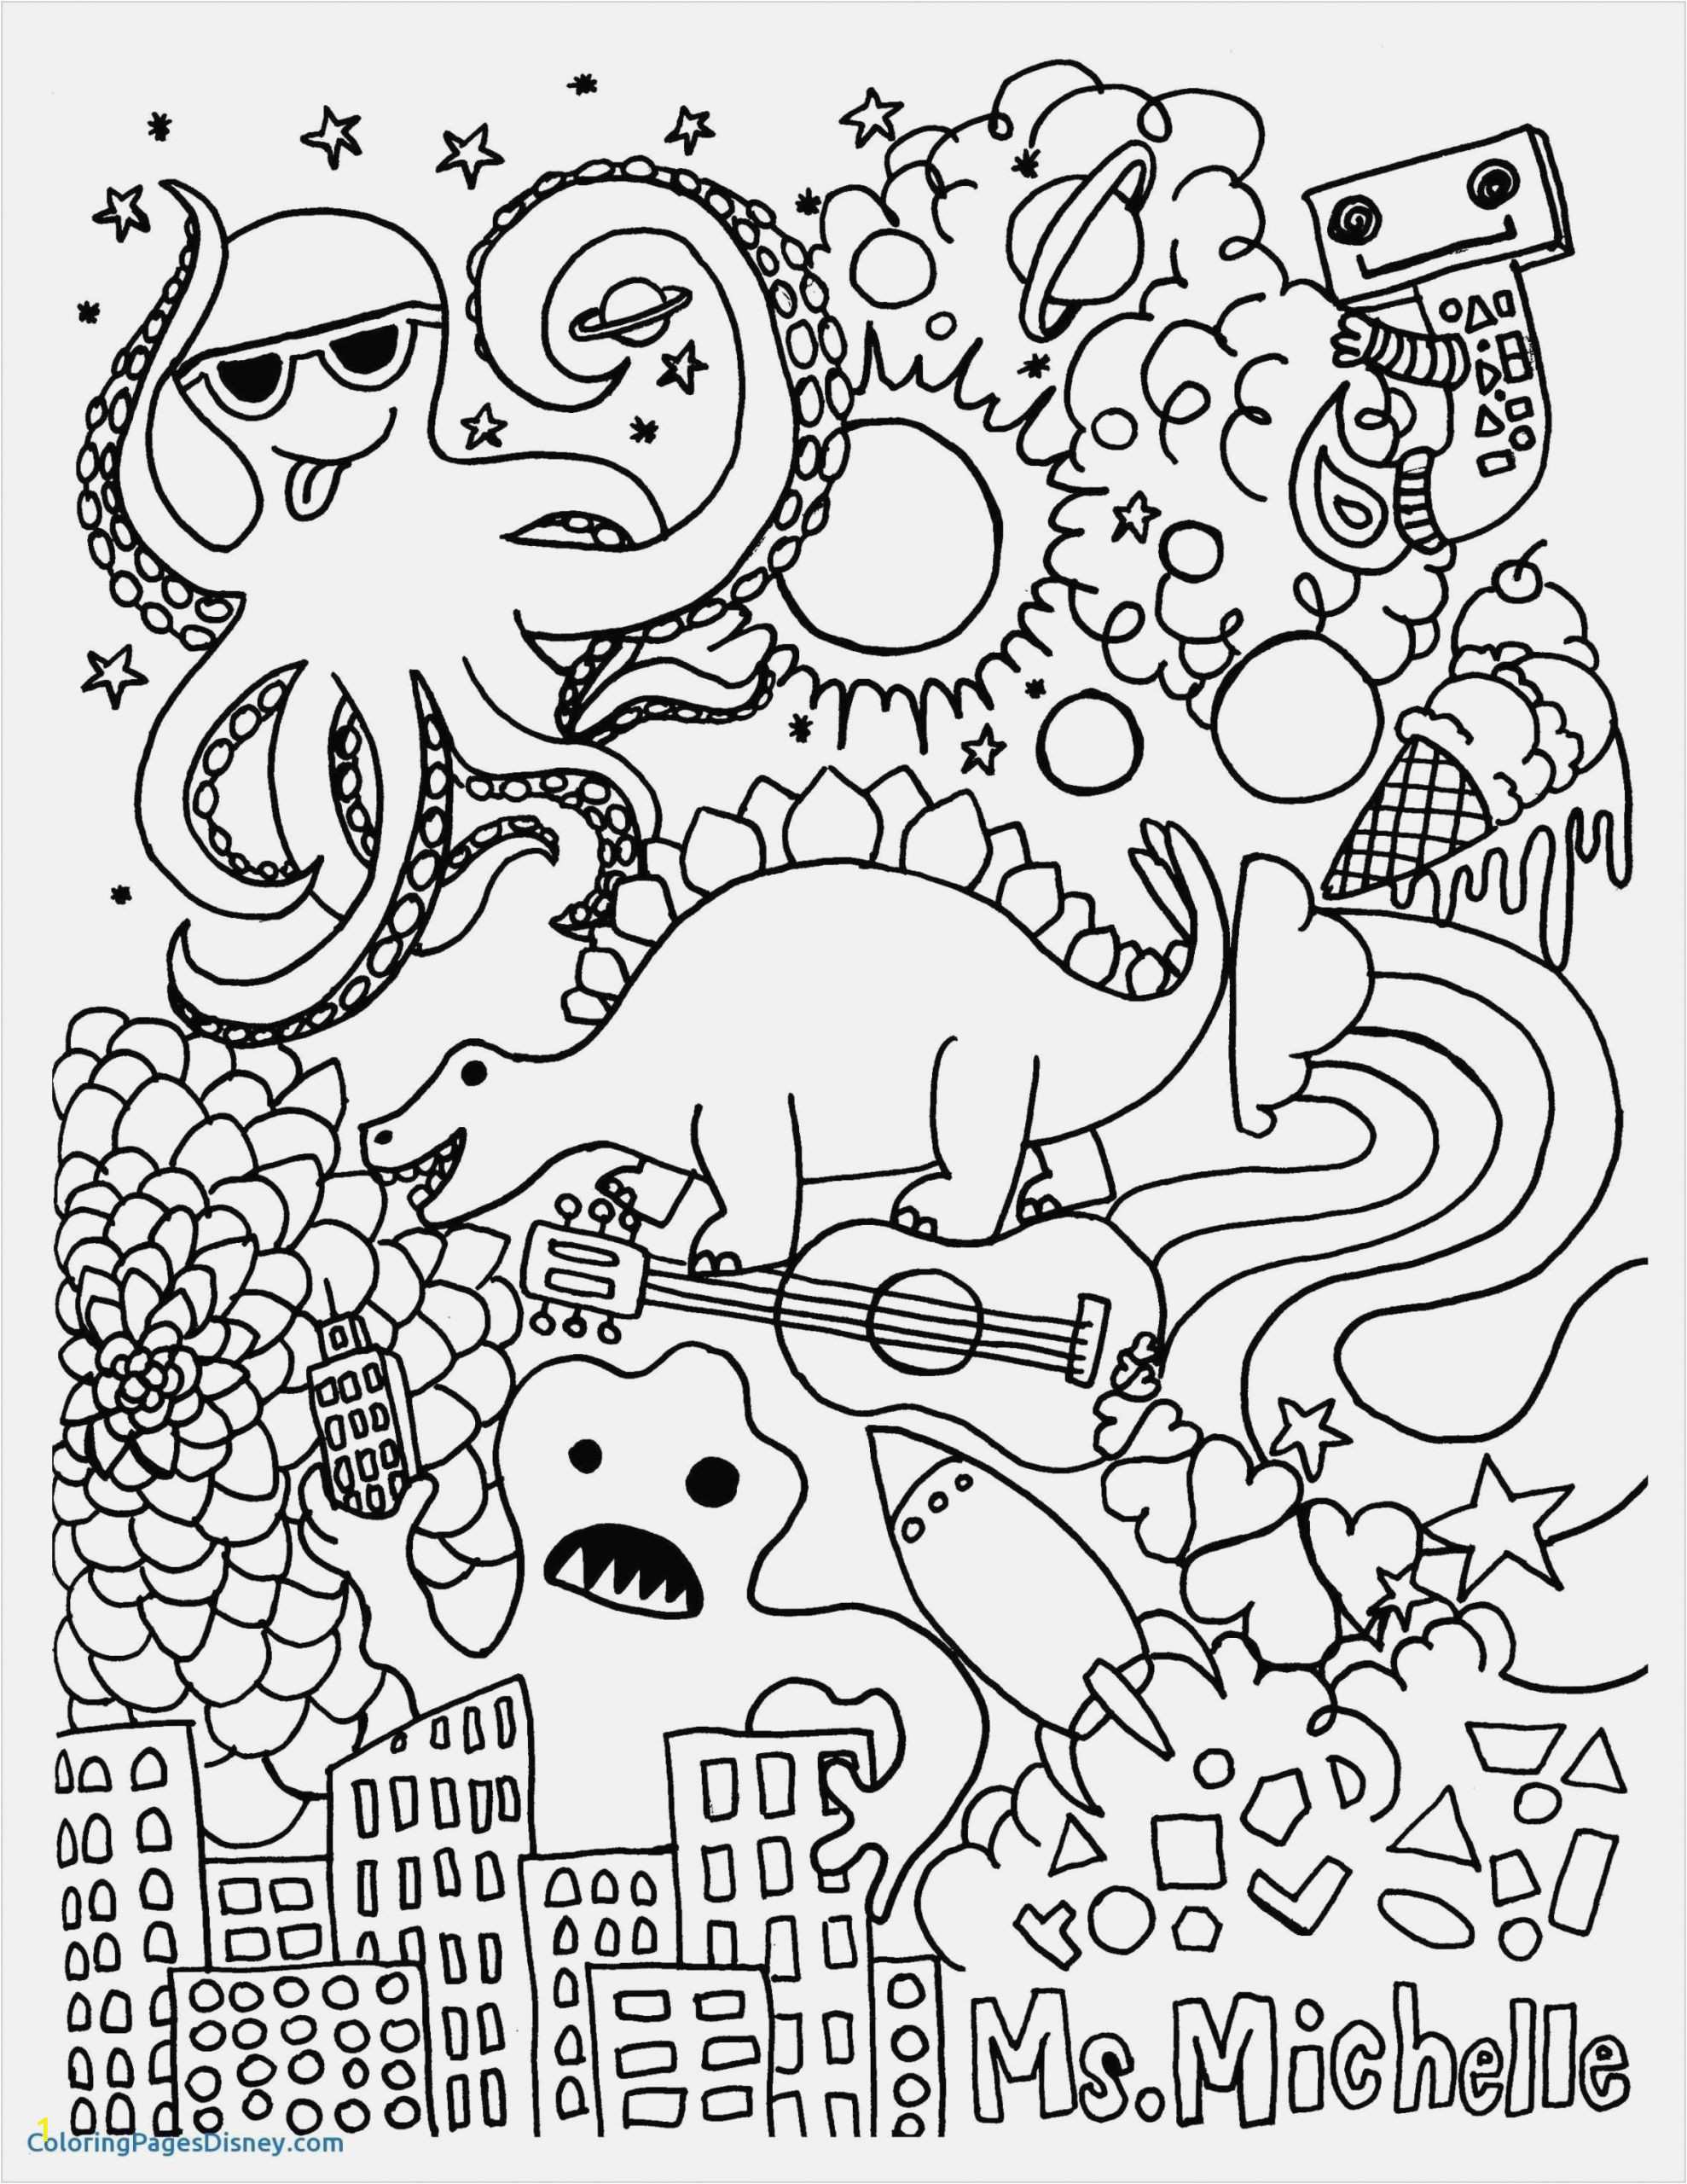 Halloween Color Pages Pdf Merry Christmas Printable Coloring Pages at Coloring Pages